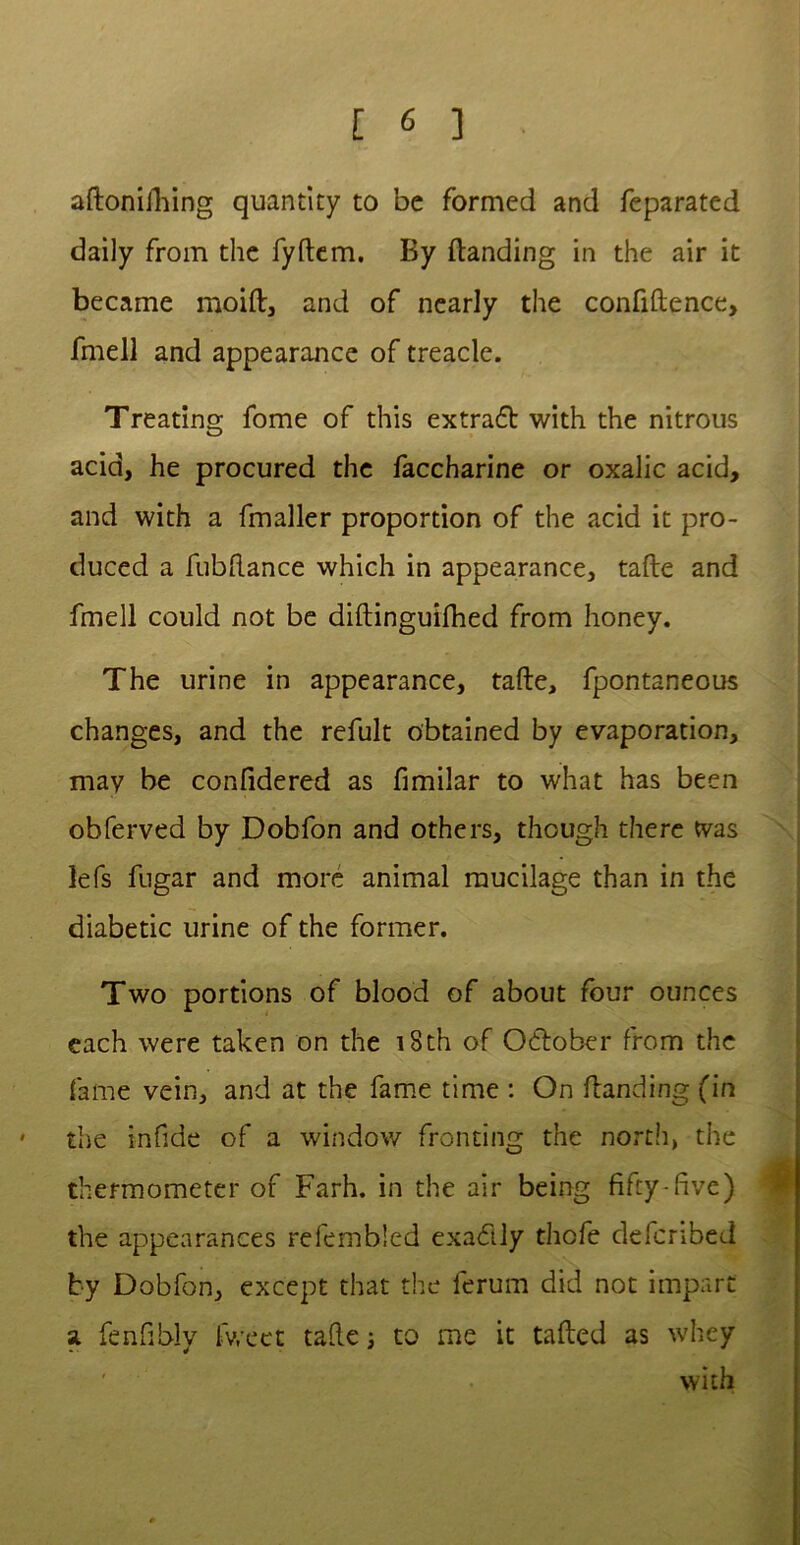 aftonifhing quantity to be formed and feparated daily from the fydem. By {landing in the air it became moift, and of nearly the confidence, fmell and appearance of treacle. Treating fome of this extrafl with the nitrous acid, he procured the faccharine or oxalic acid, and with a fmaller proportion of the acid it pro- duced a fubdance which in appearance, tade and fmell could not be didinguifhed from honey. The urine in appearance, tade, fpontaneous changes, and the refult obtained by evaporation, may be confidered as fimilar to what has been obferved by Dobfon and others, though there was lefs fugar and more animal mucilage than in the diabetic urine of the former. Two portions of blood of about four ounces each were taken on the 18th of O&ober from the fame vein, and at the fame time : On danding (in ' the infide of a window fronting the north, the thermometer of Farh. in the air being fifty-five) the appearances refembled exactly thofe defcribed by Dobfon, except that the ferum did not impart a. fenfibly fweet tade; to me it taded as whey with